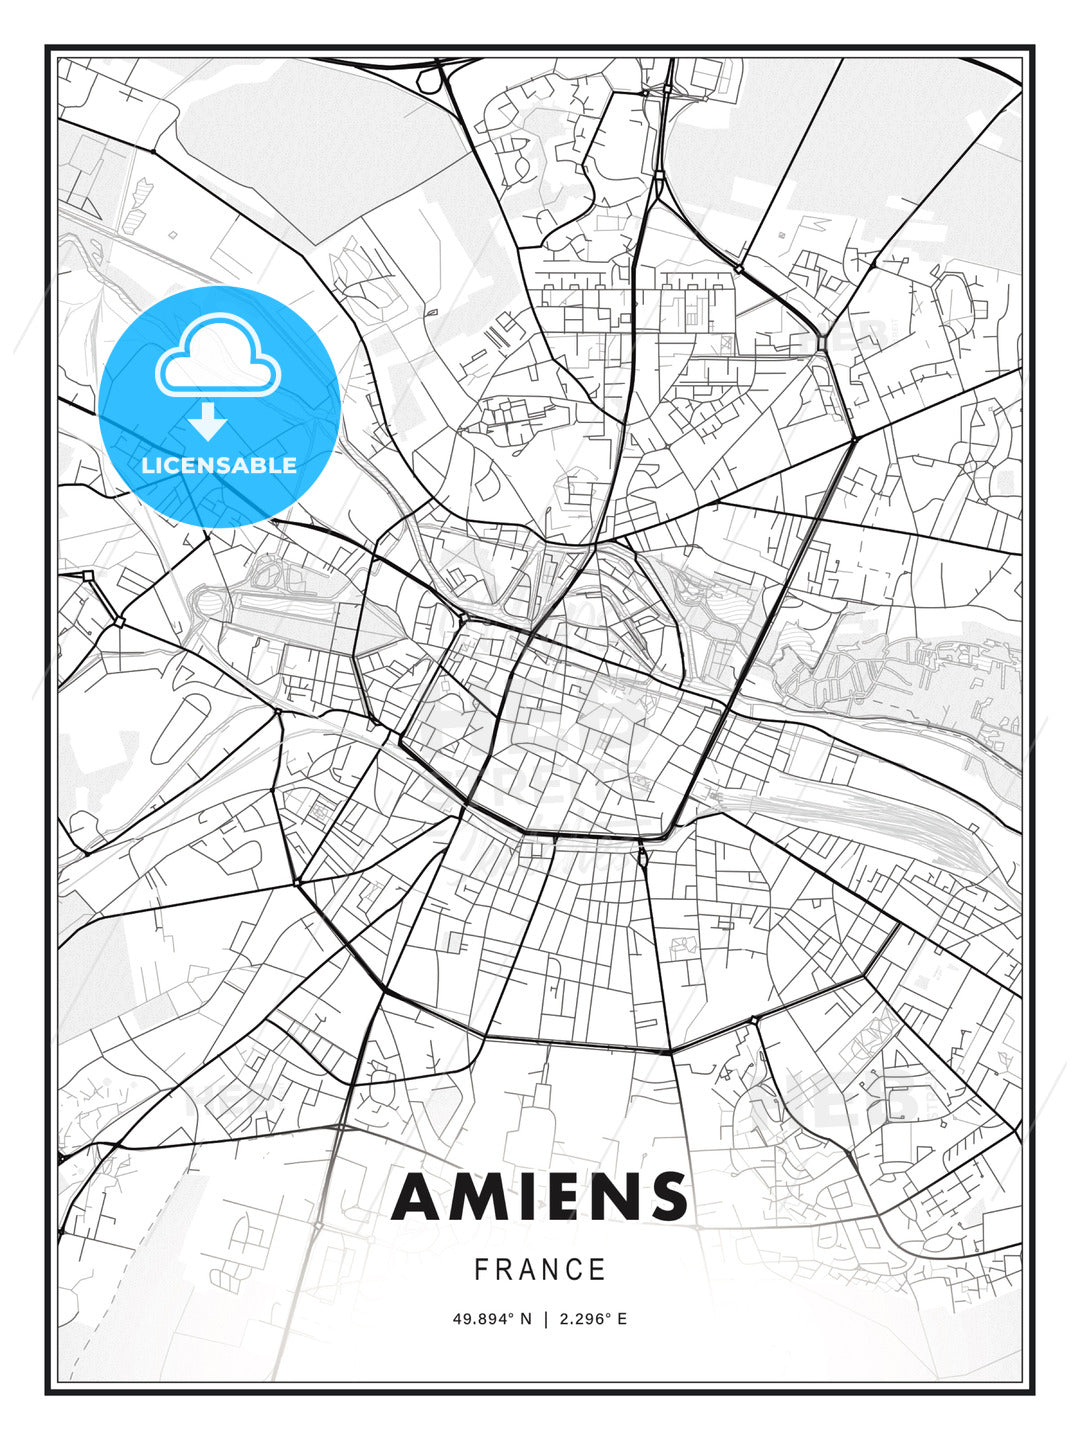 Amiens, France, Modern Print Template in Various Formats - HEBSTREITS Sketches